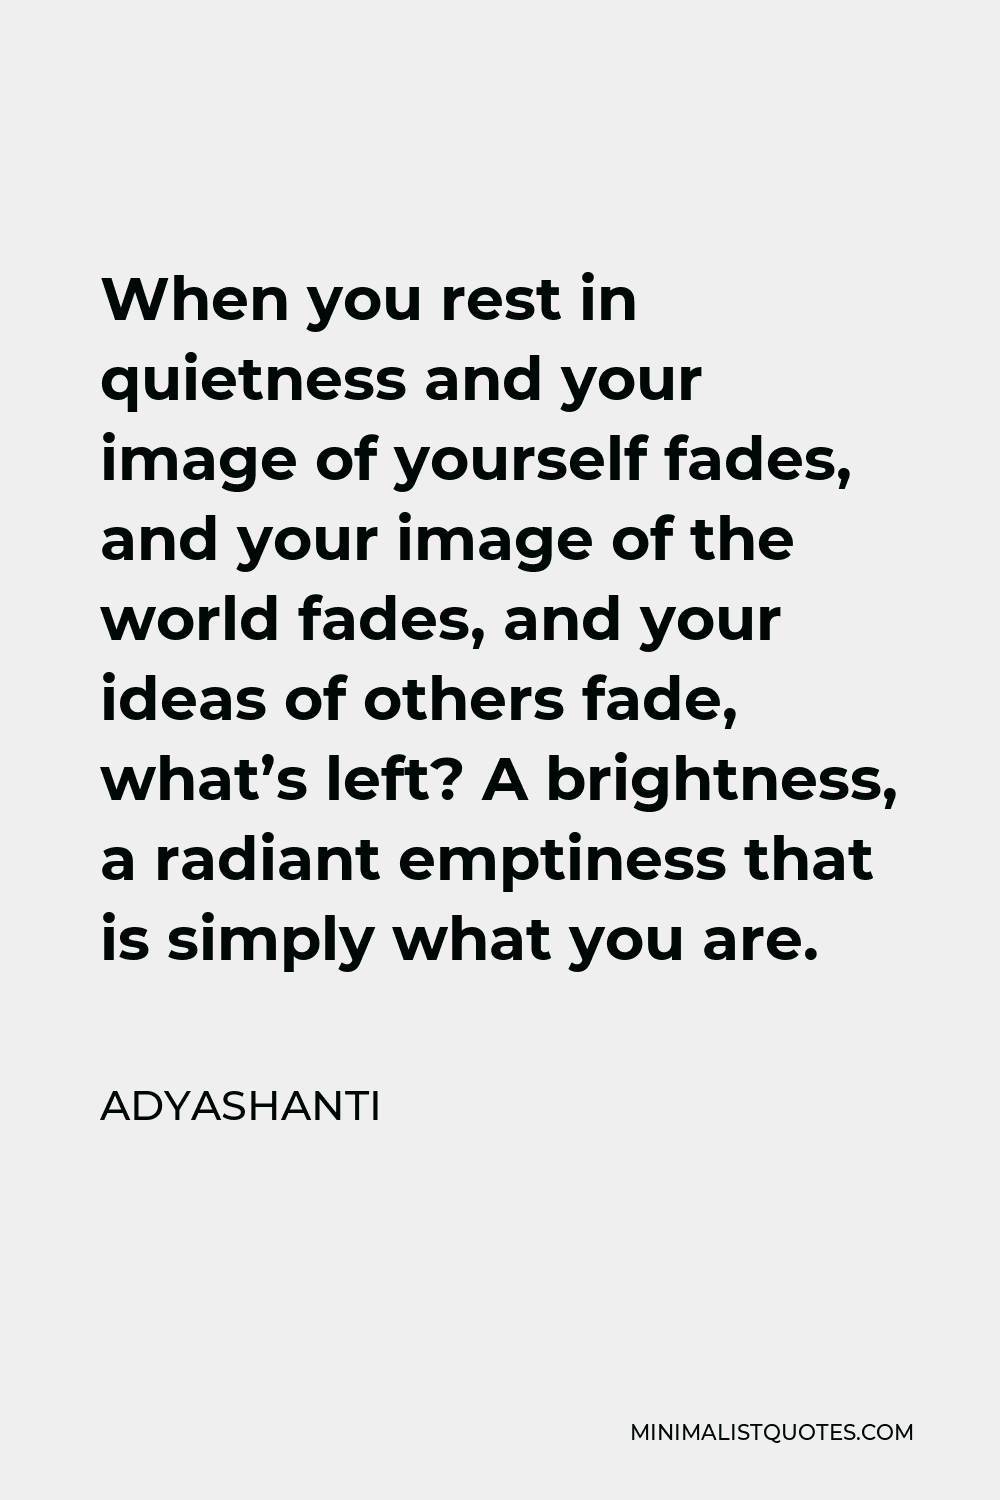 Adyashanti Quote - When you rest in quietness and your image of yourself fades, and your image of the world fades, and your ideas of others fade, what’s left? A brightness, a radiant emptiness that is simply what you are.